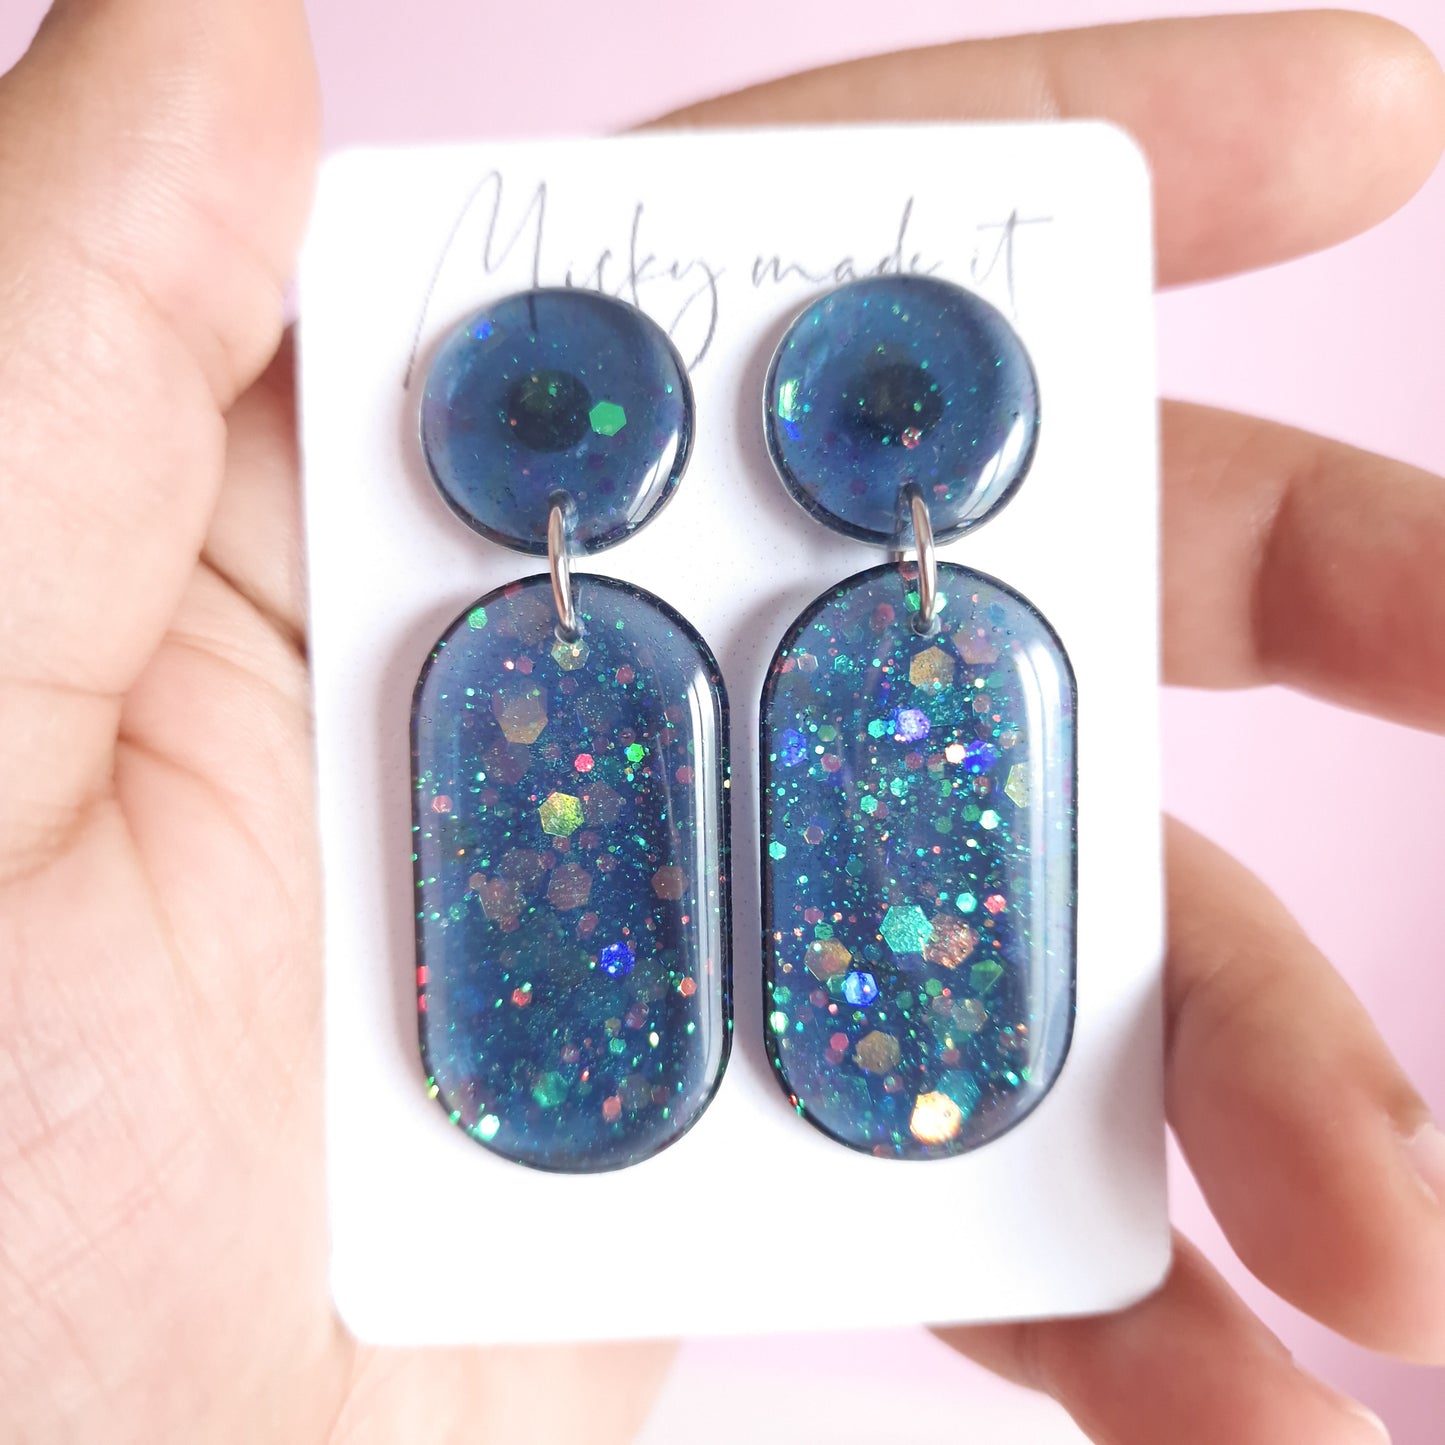 Micky made it Hestia earrings in mermaid tears transparent blue glitter mix with iridescent colour shift 